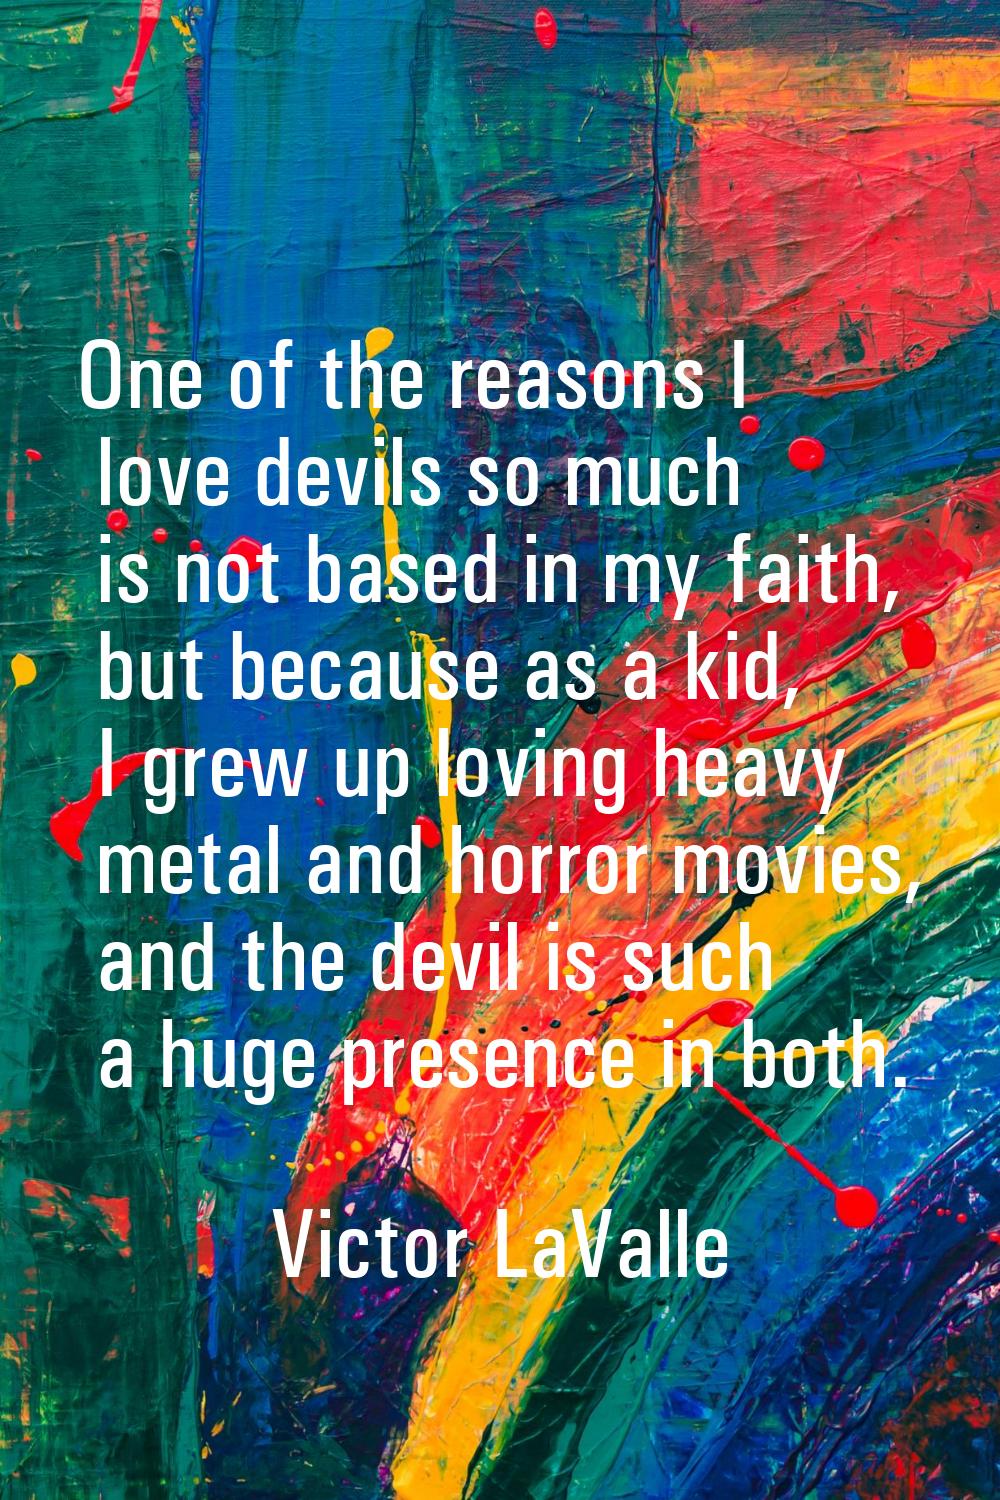 One of the reasons I love devils so much is not based in my faith, but because as a kid, I grew up 